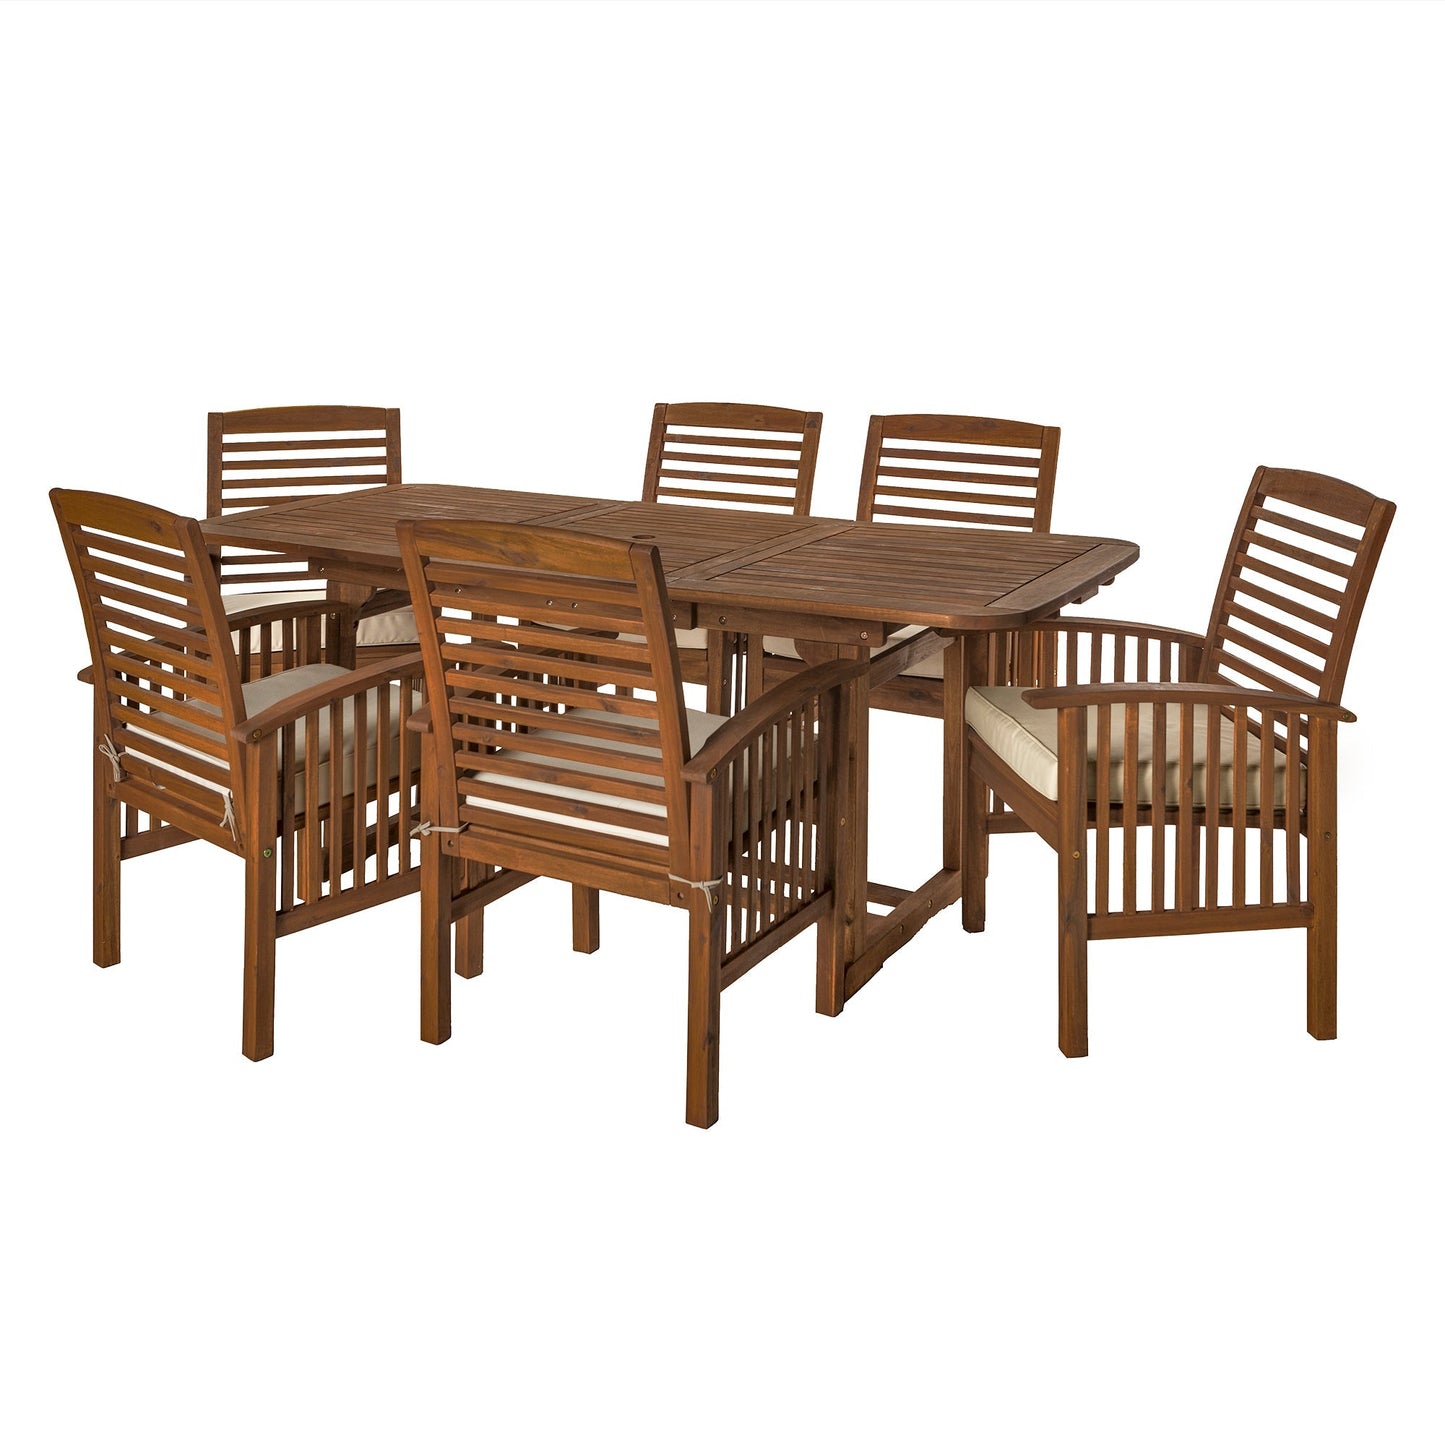 Midland 7-Piece Outdoor Patio Dining Set with Cushions